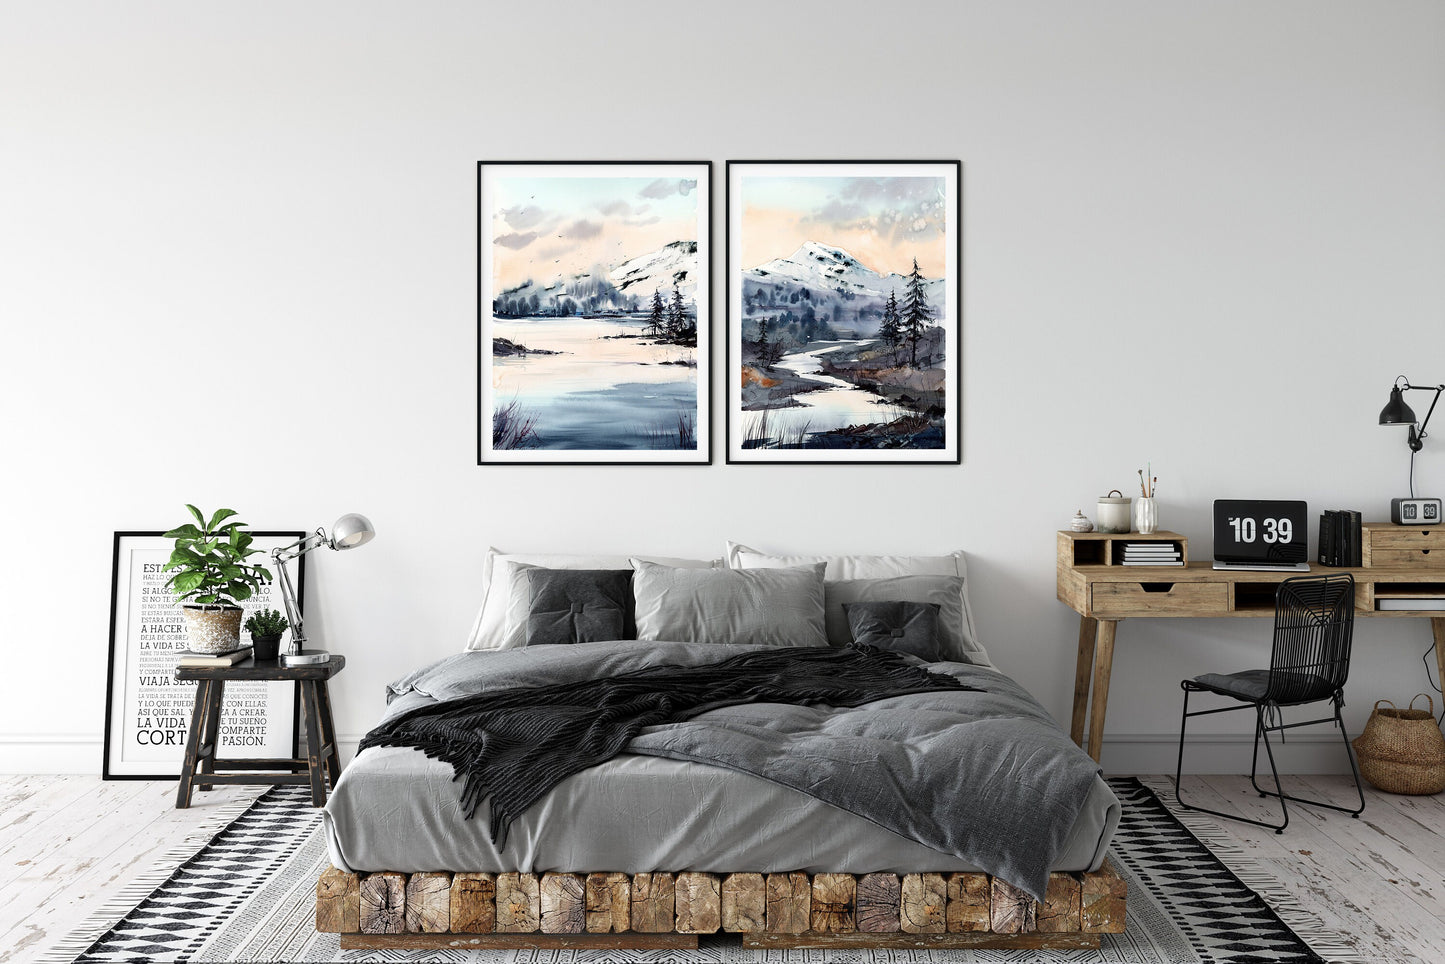 Abstract Nature Prints, Set of 2 Landscape Art, Modern Wall Art, Pine Trees Scenery Paintings, Mountain Lake, Home Decor